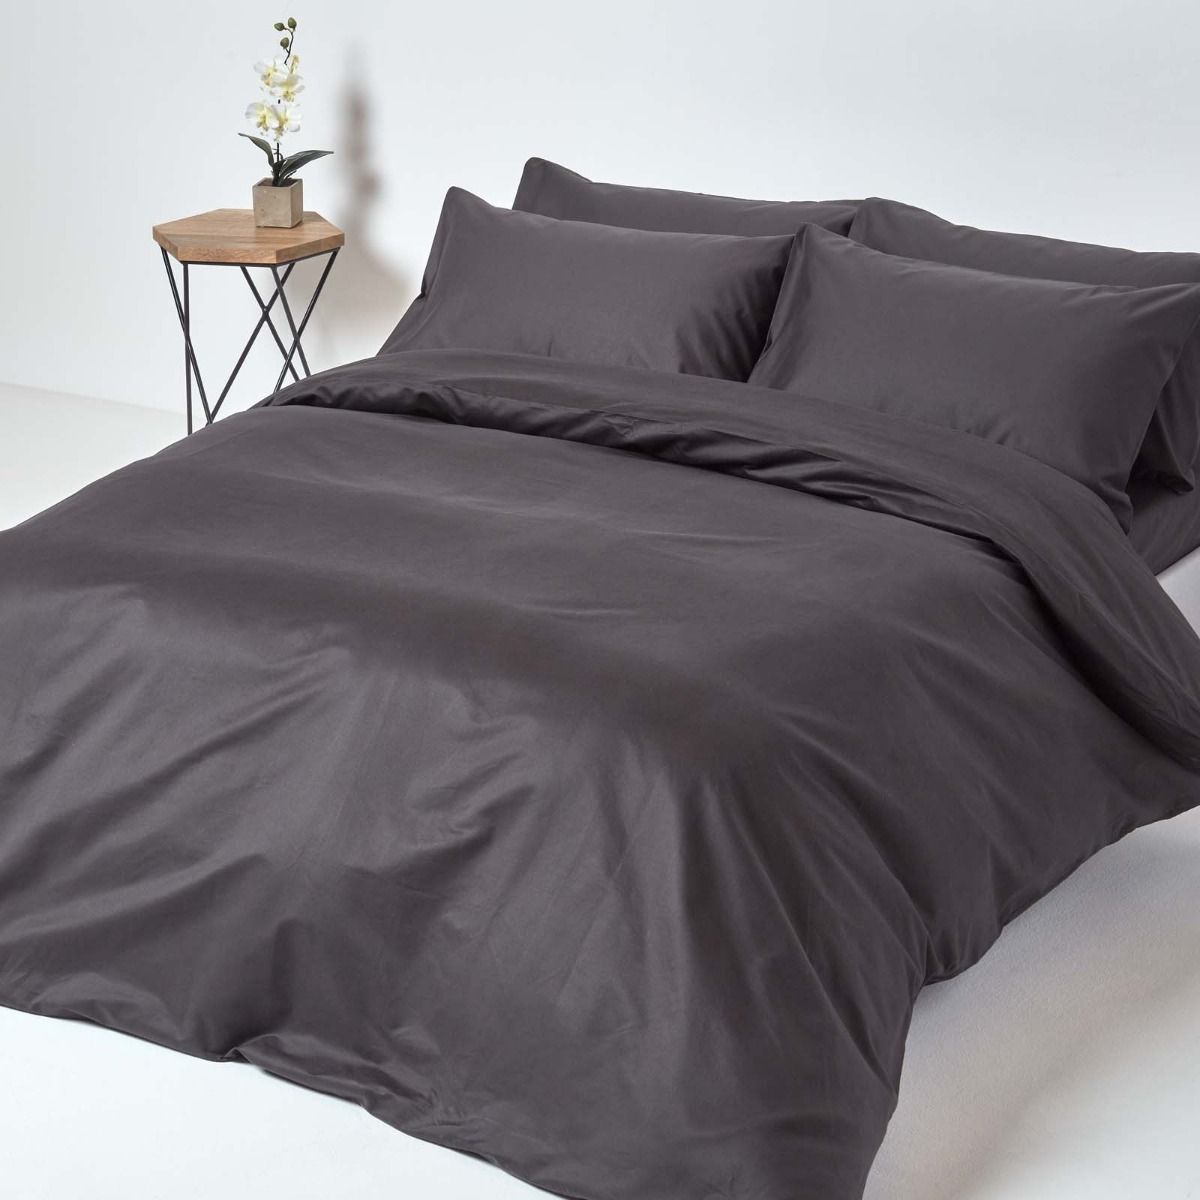 Dark Charcoal Grey Egyptian Cotton, Quality Duvet Covers